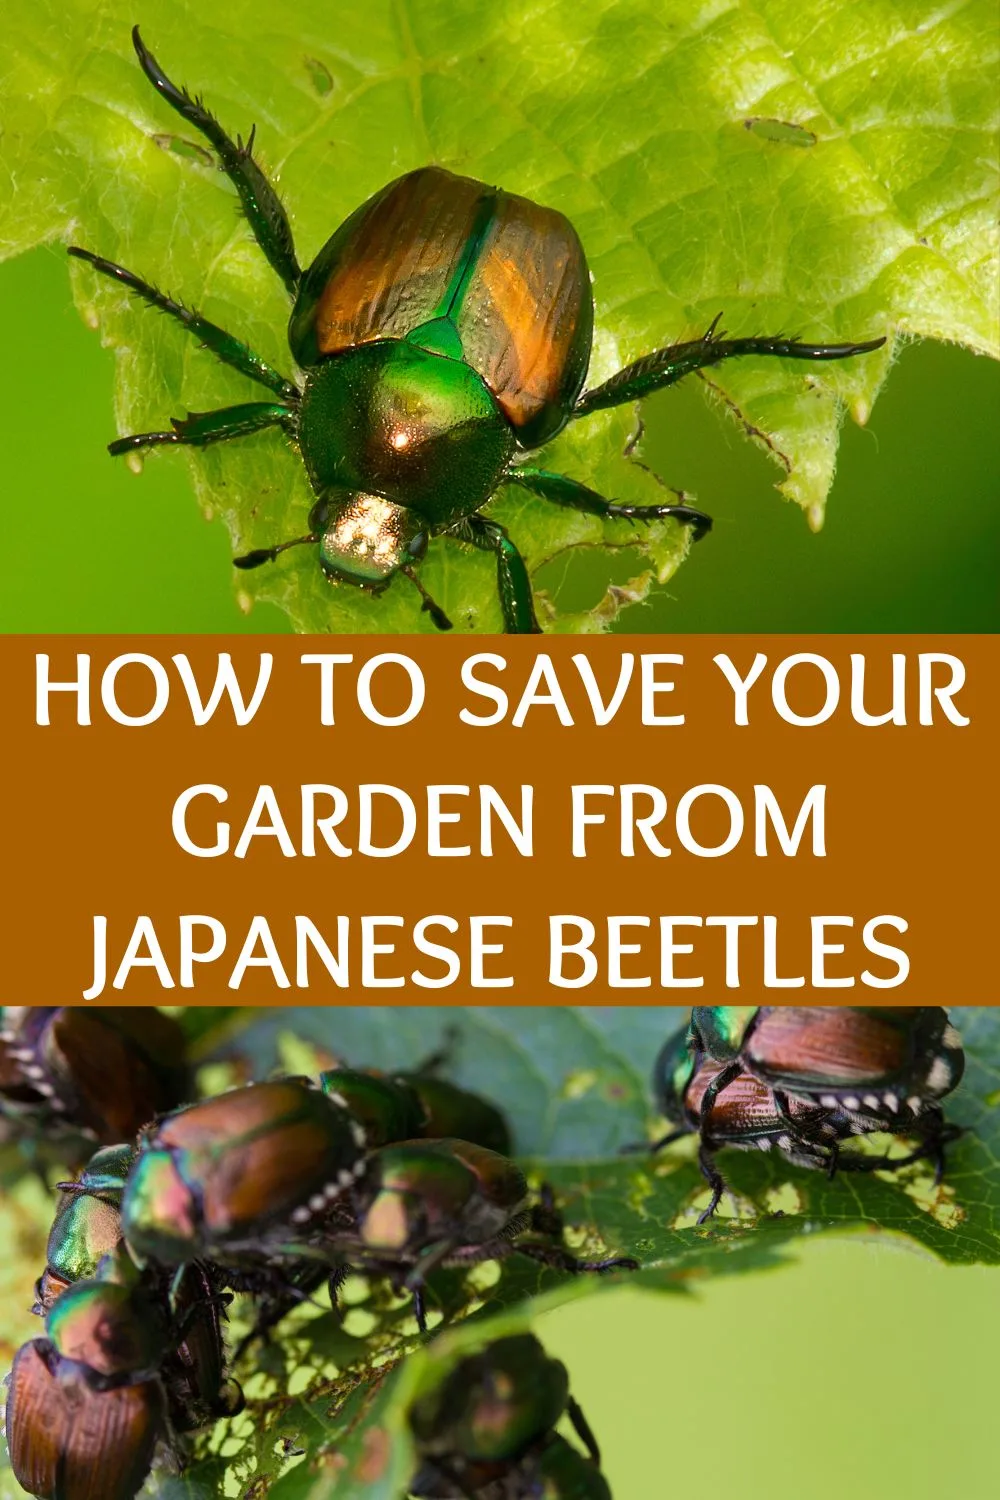 how to save your garden from Japanese beetles